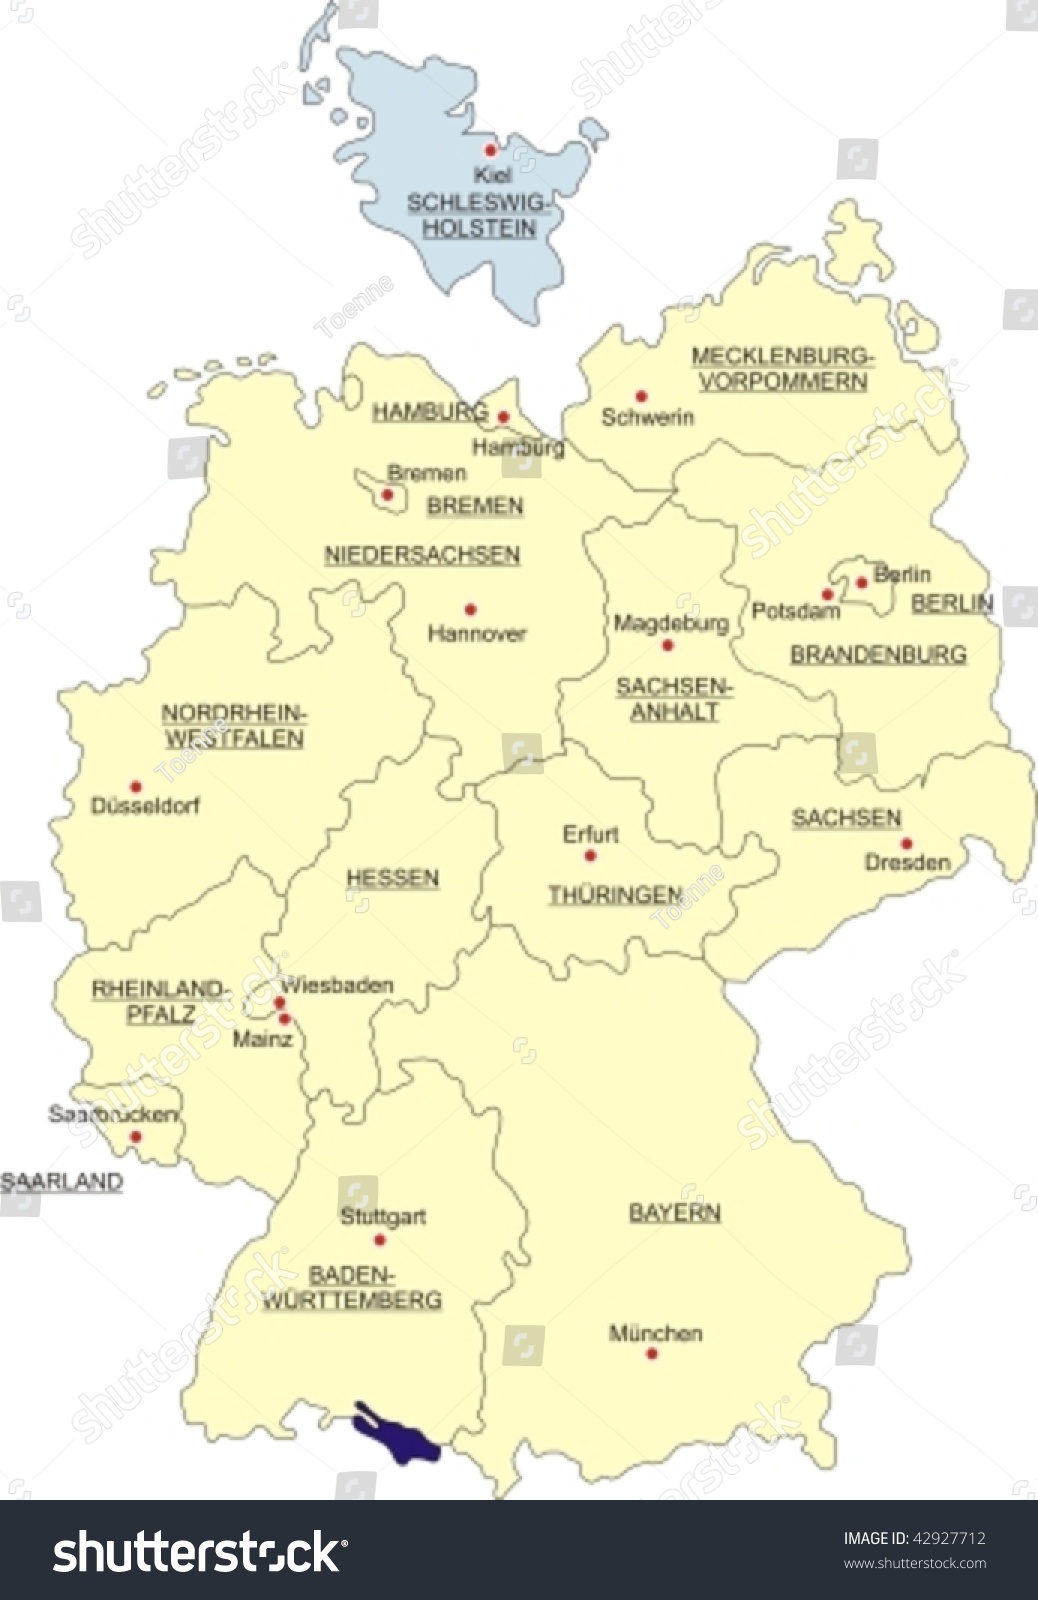 SVG of Map of Germany, national boundaries and national capitals; Schleswig-Holstein cut out and silhouetted svg